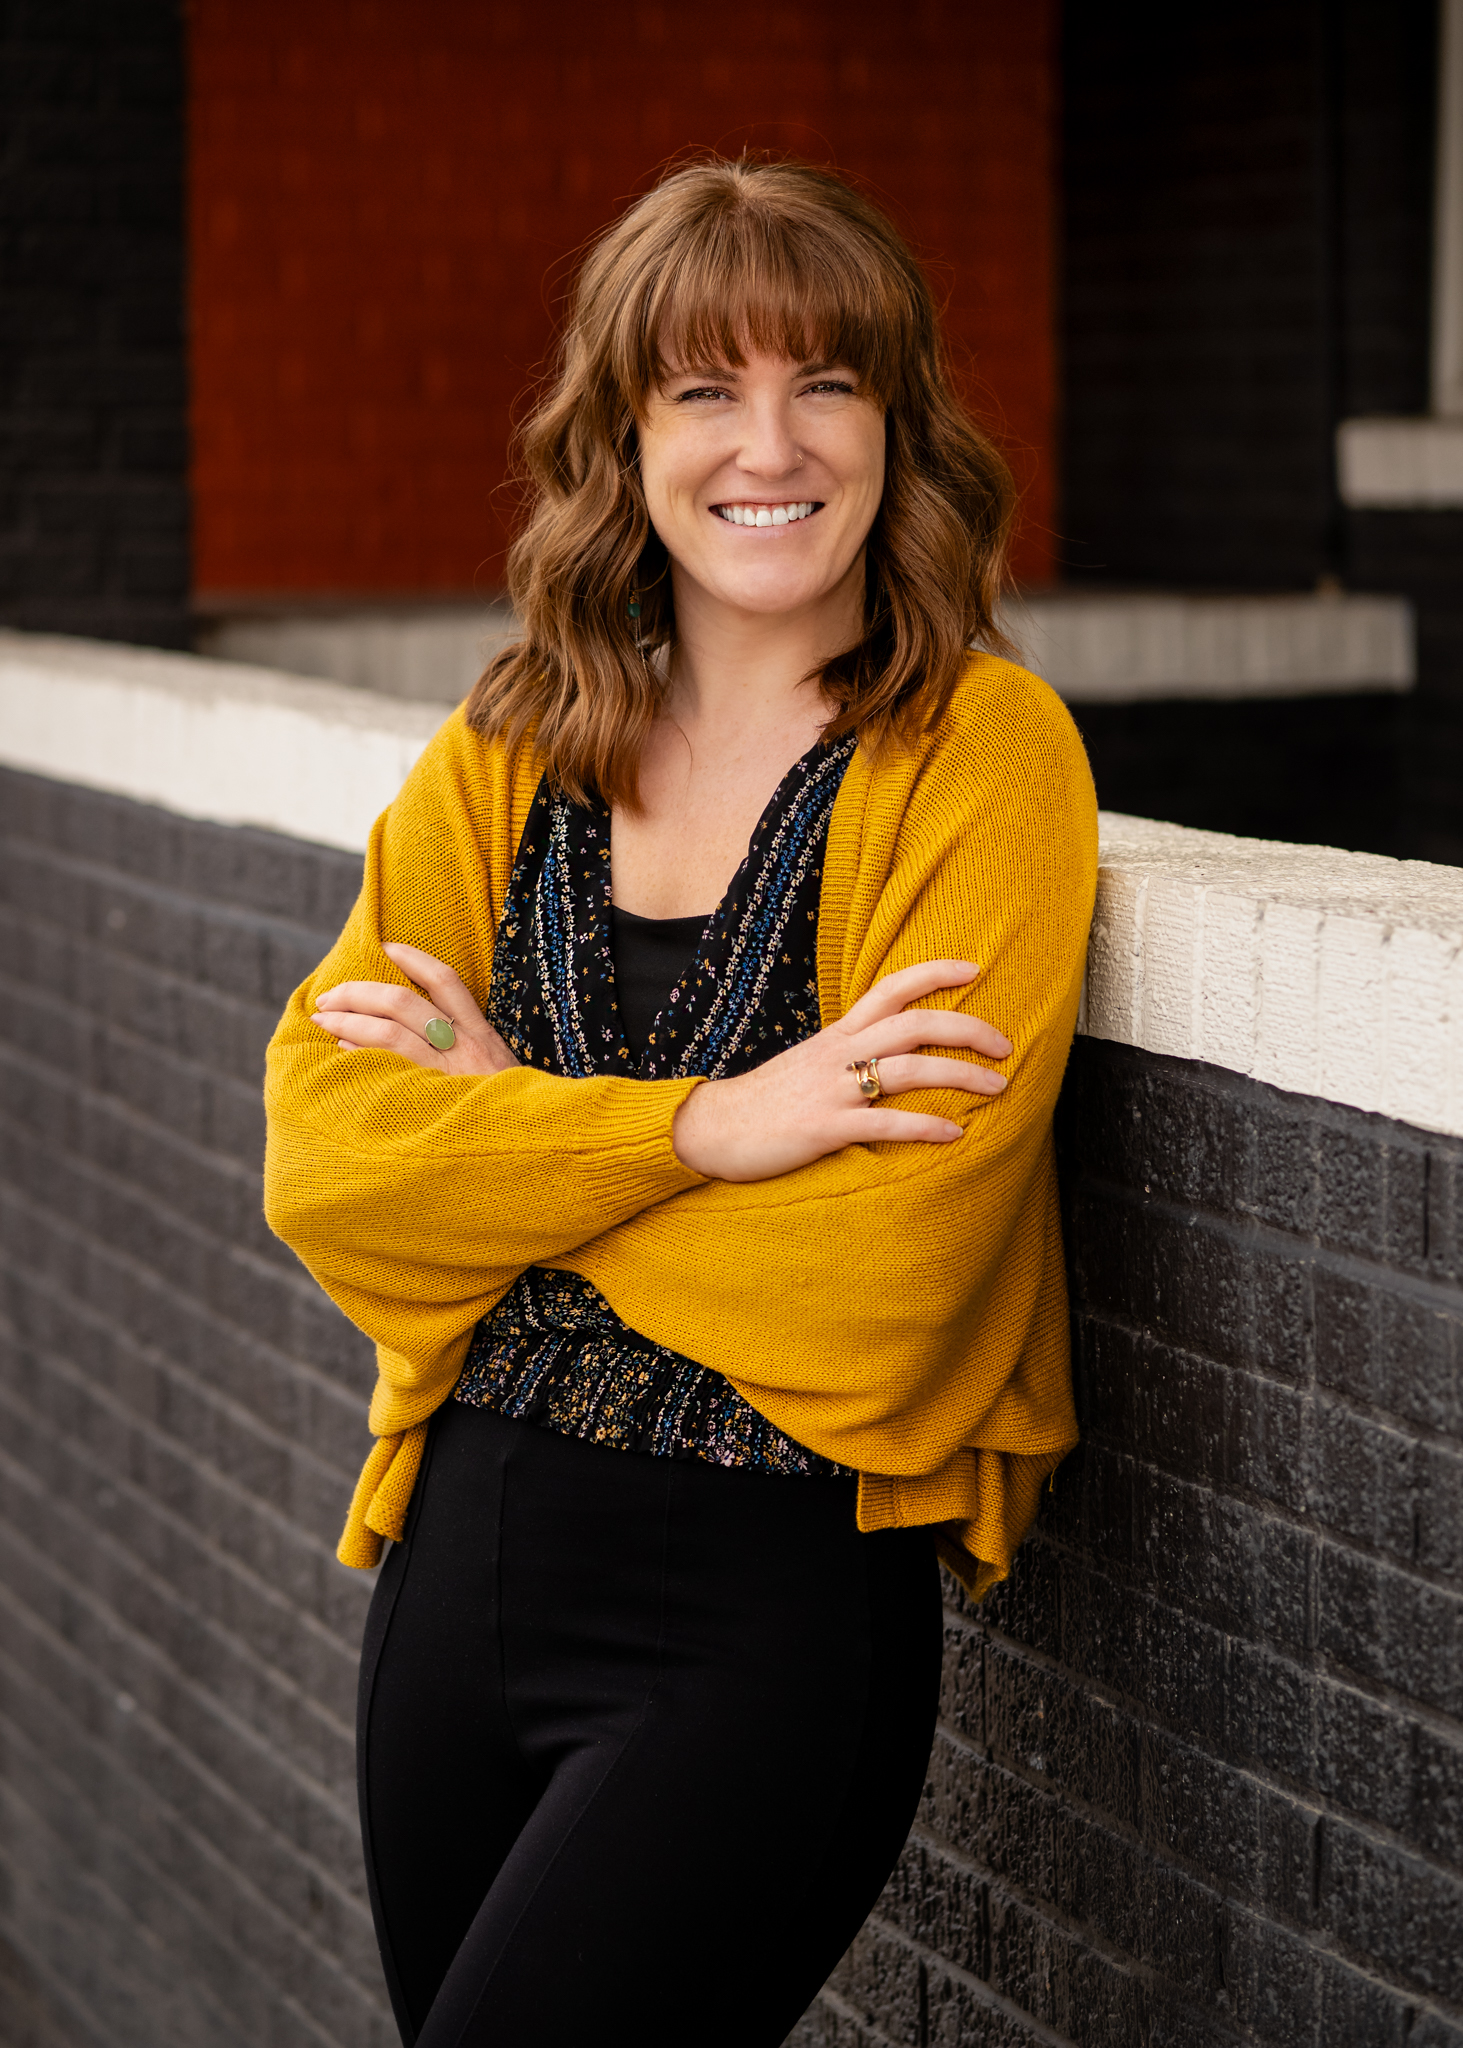 A woman smiling, standing with arms crossed, dressed up in a yellow cardigan and black pants, leaning against a brick wall.